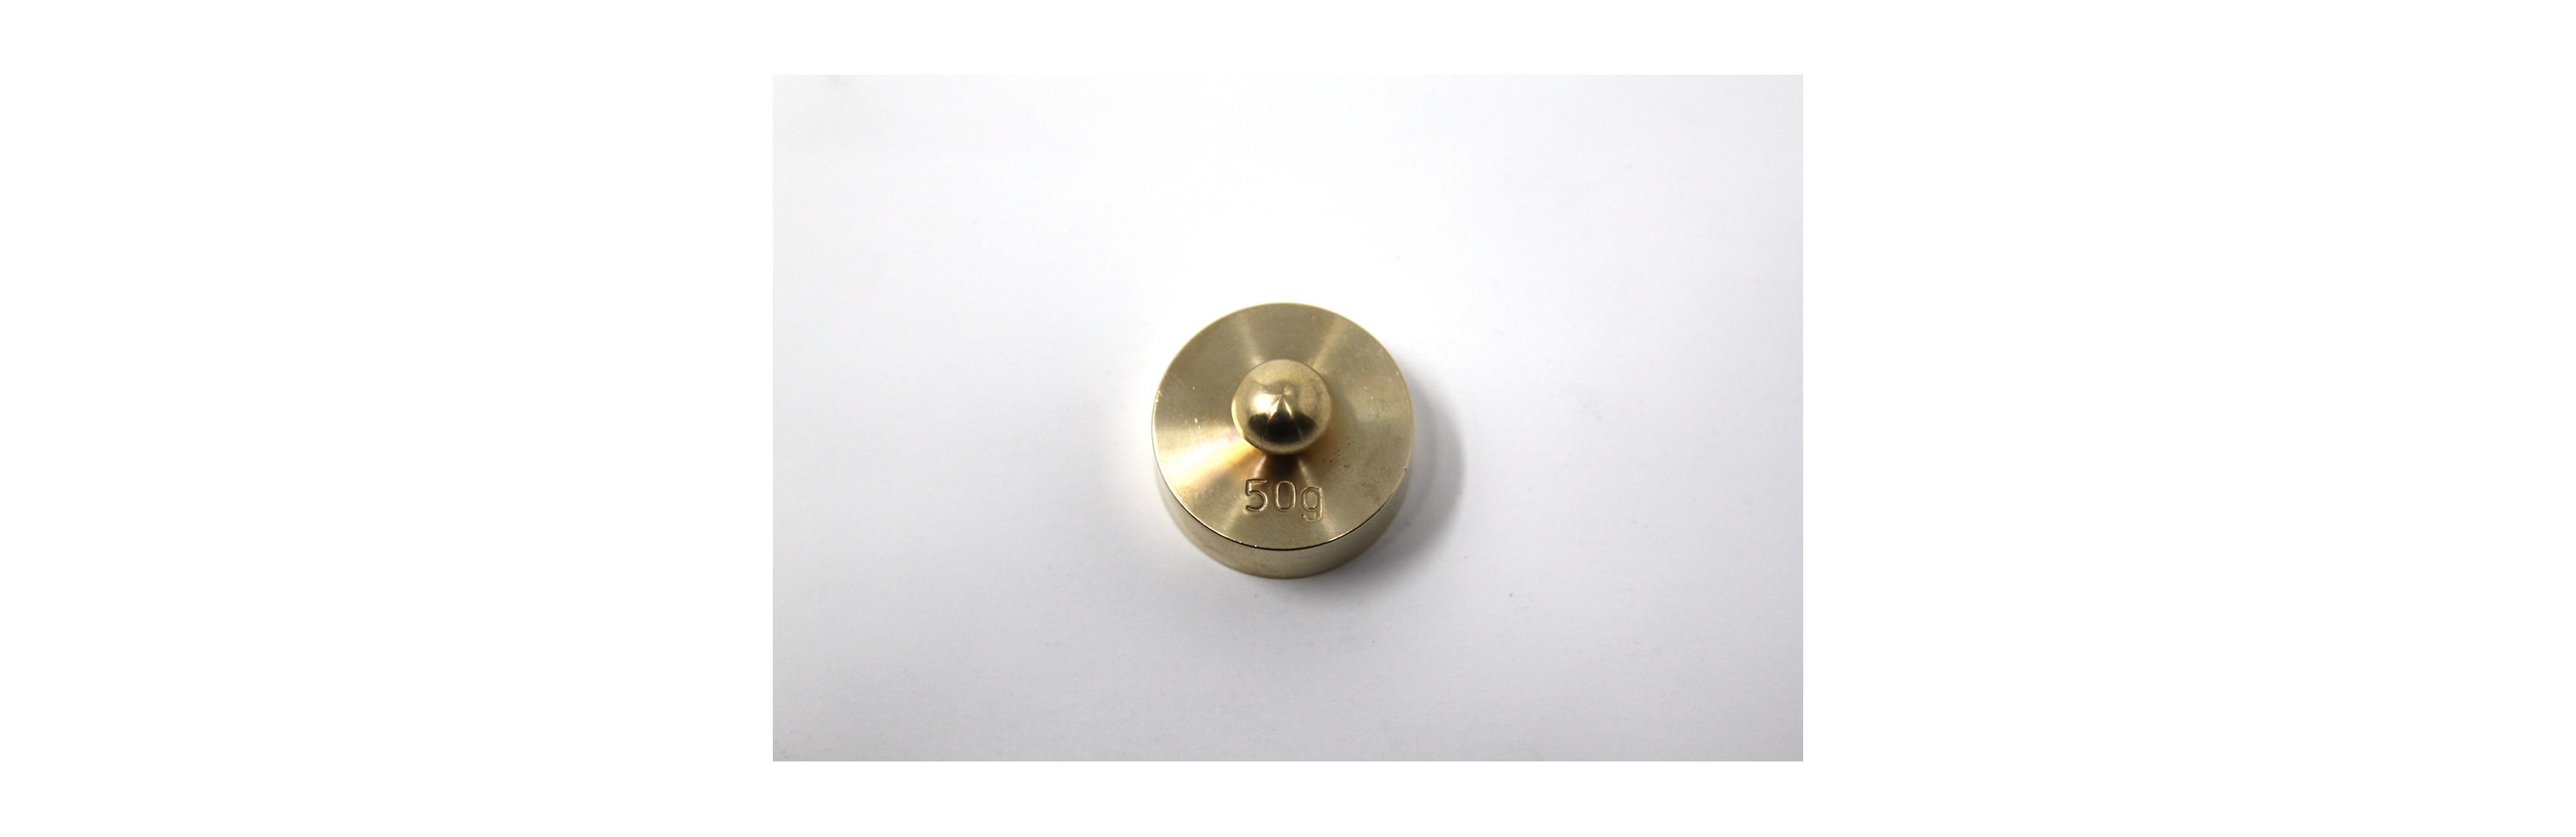 Wissner® active learning - Weight brass 50 g